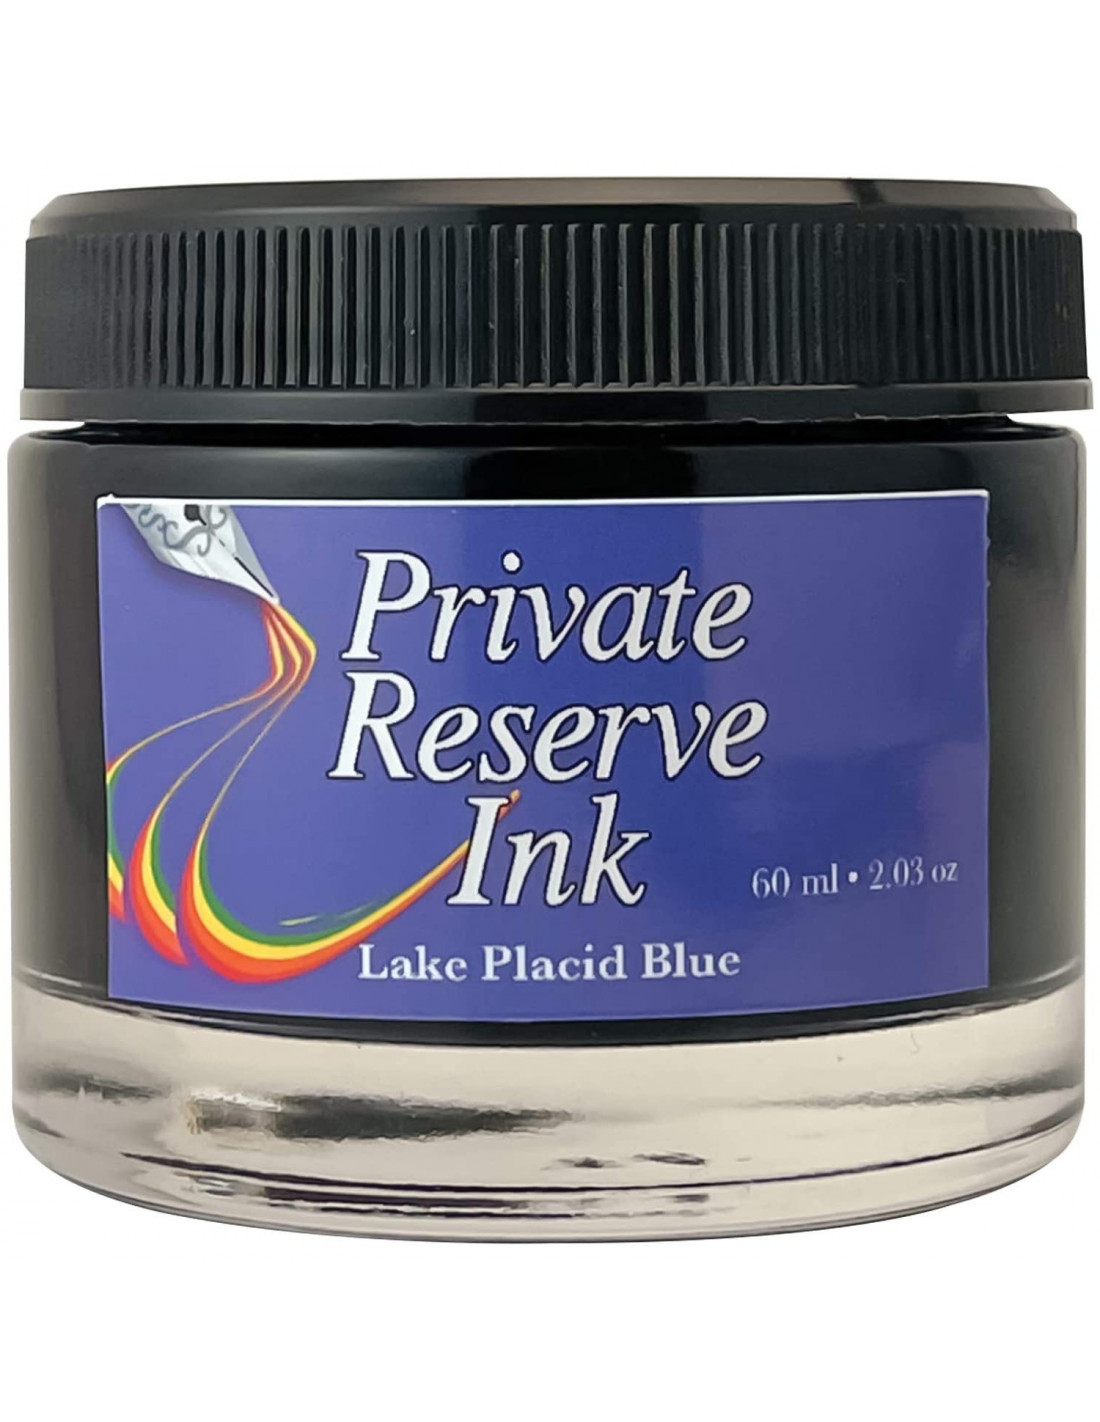 Flacon d'encre 60ml - Lake Placid Blue - Private Reserve Ink